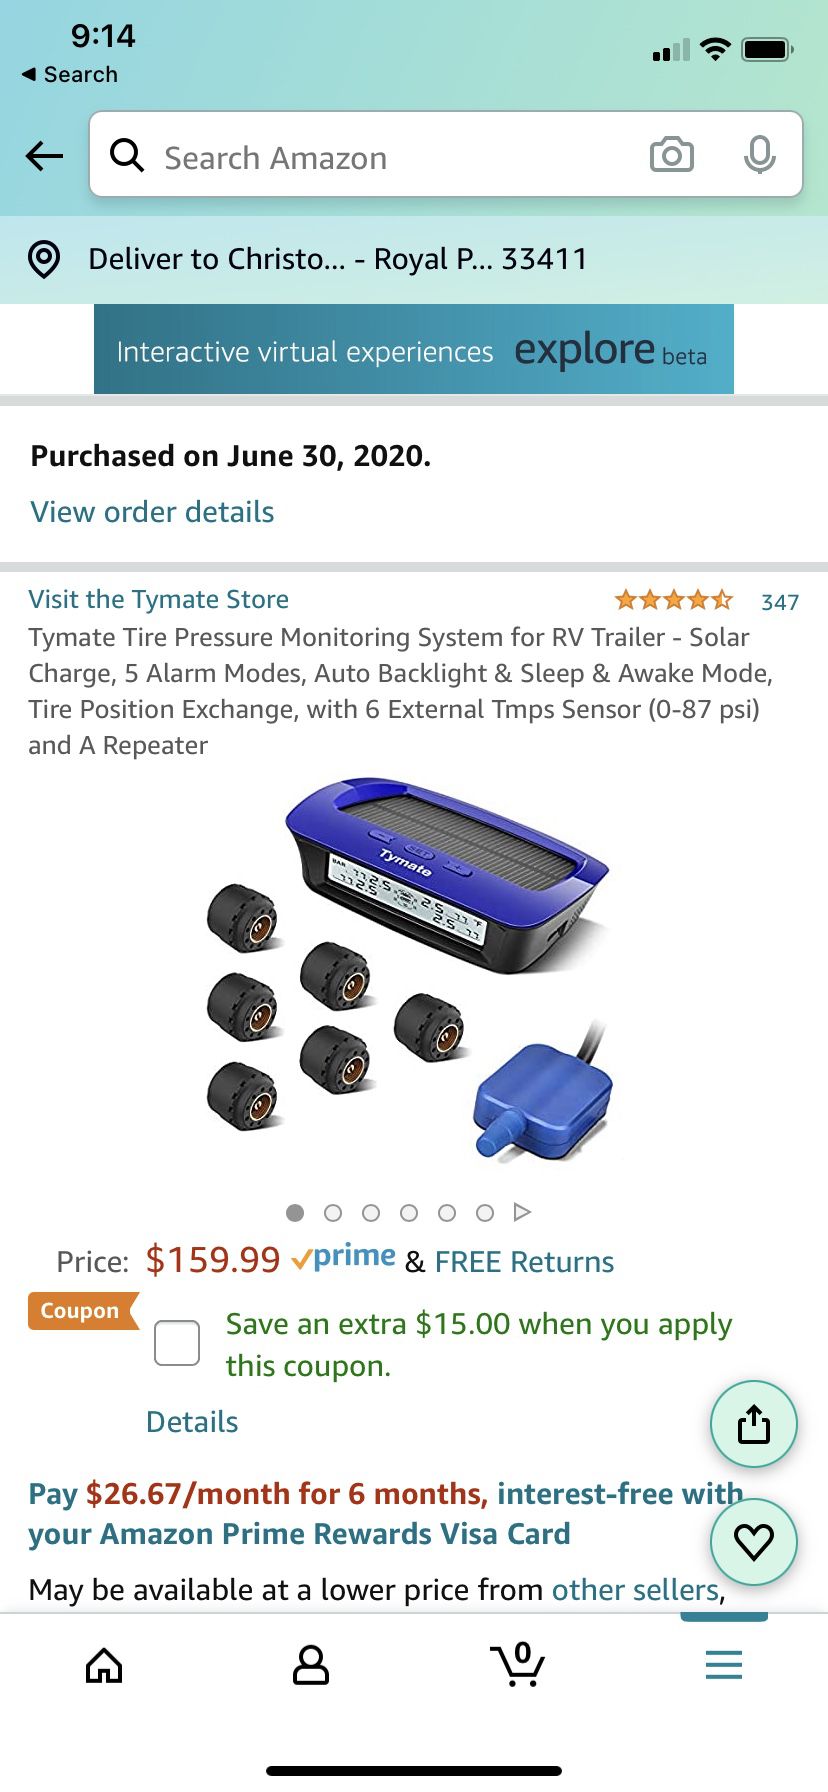 Tymate tire pressure monitoring system